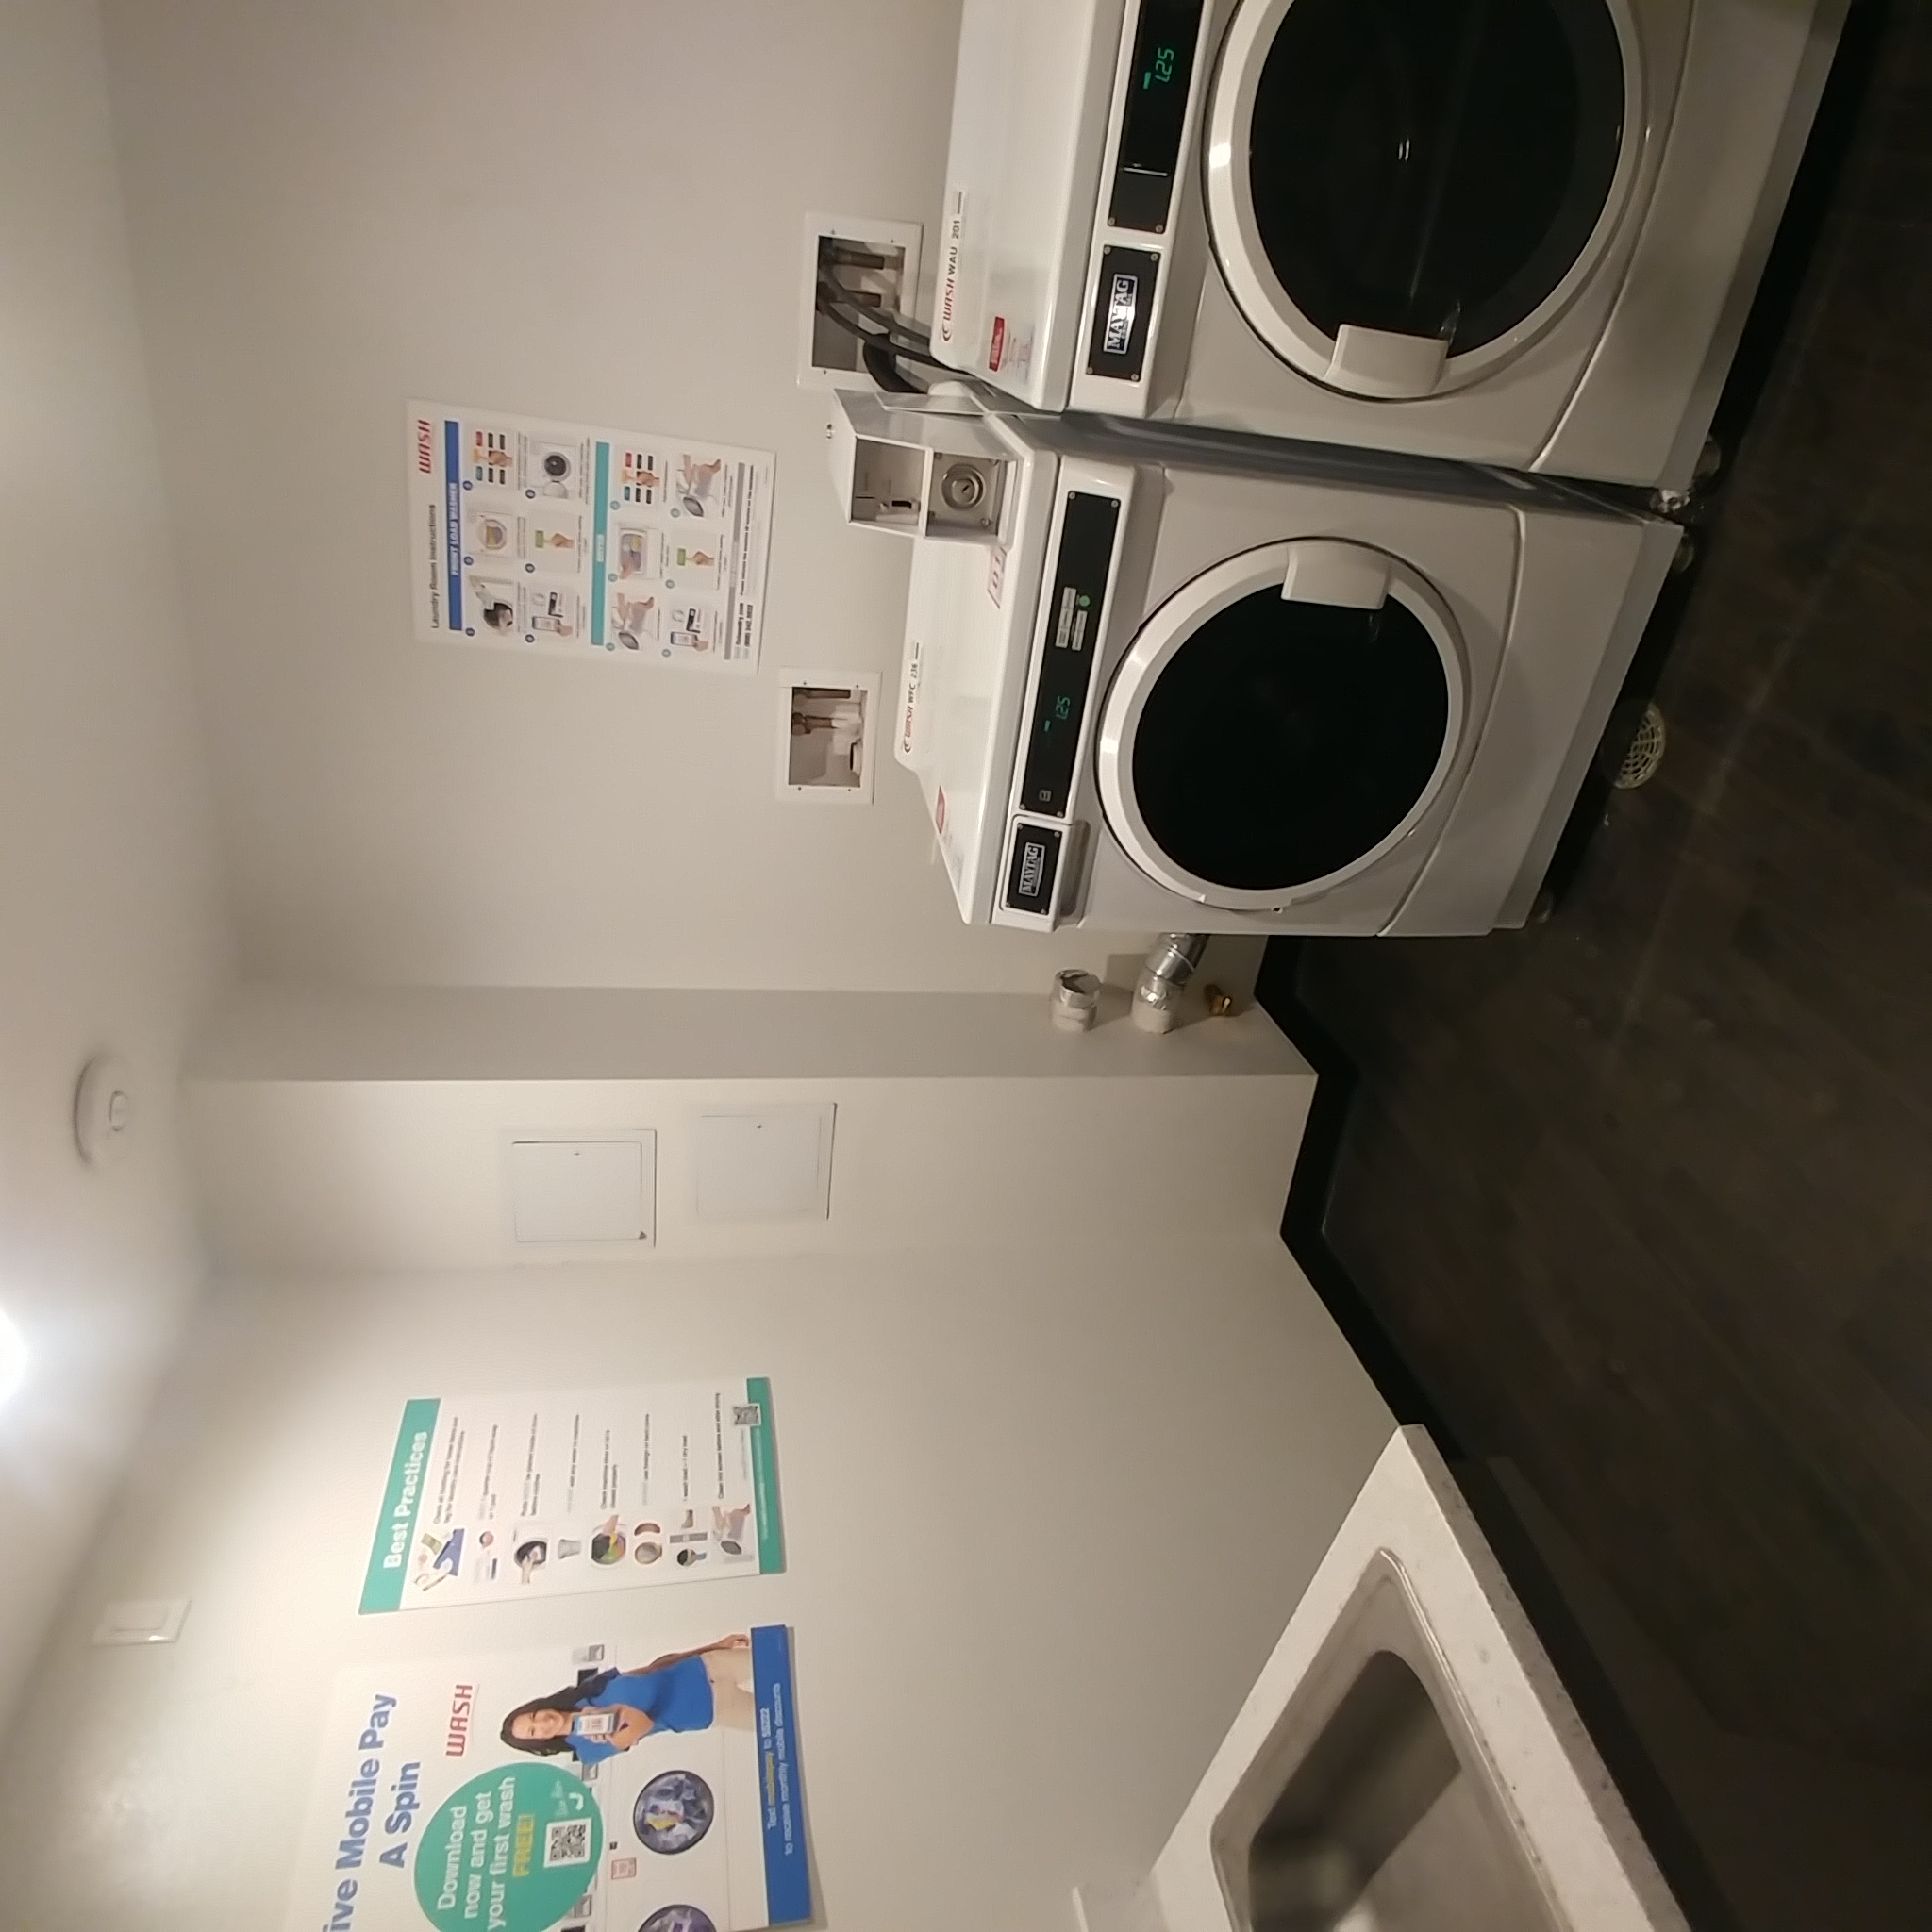 Panama Apartments laundry room. image contains two front load washing units, sink, and operating signs posted on wall